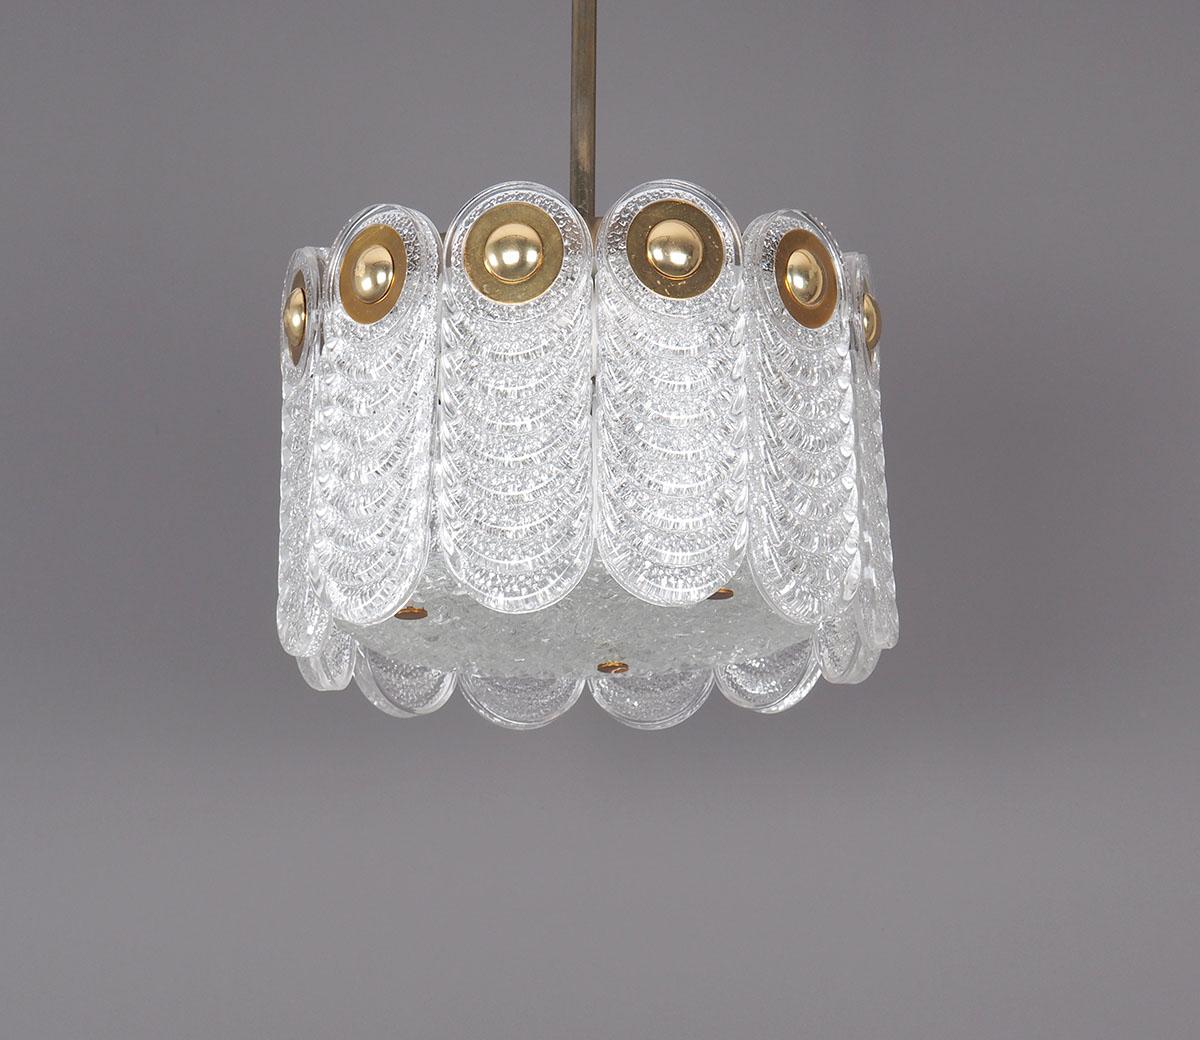 Vintage hanging lamp from Kaiser Leuchten Germany. Produced in the 60s. The lamp is made up of elongated discs of ribbed crystal glass with a crystal glass cover at the bottom and a brass plate at the top. The glass discs are fixed with round brass